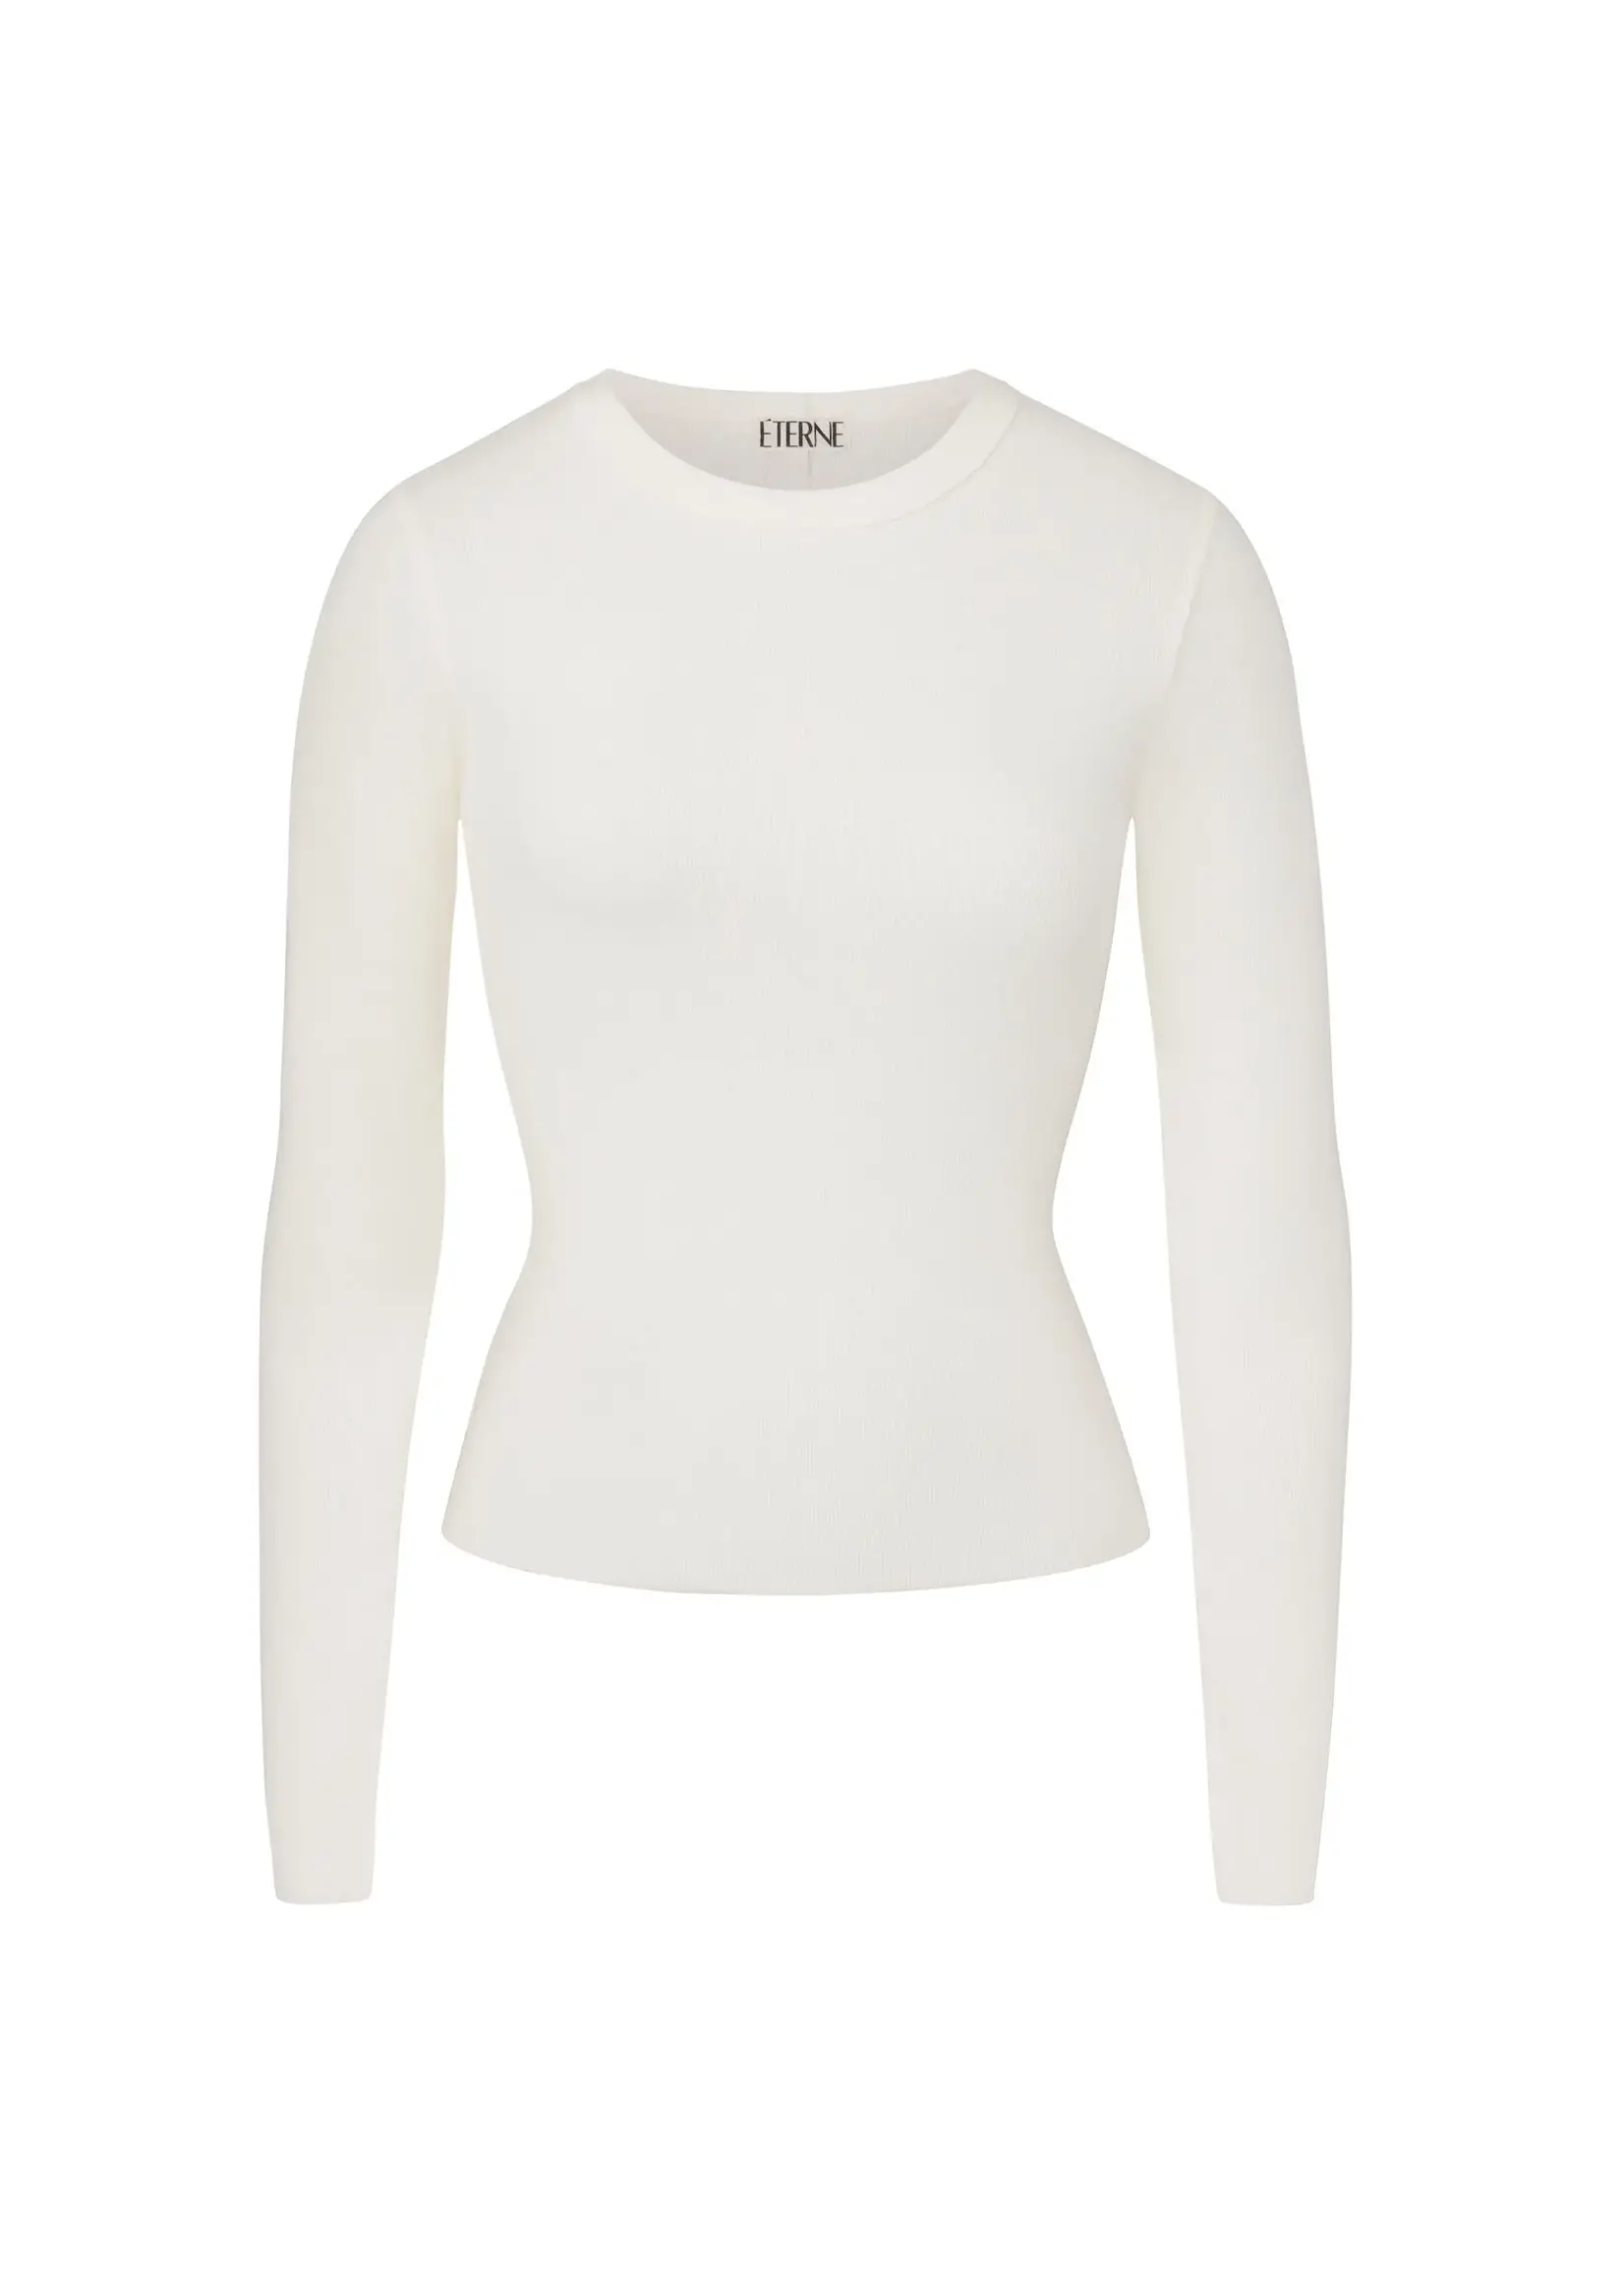 eterne Long sleeve fitted top - Cream